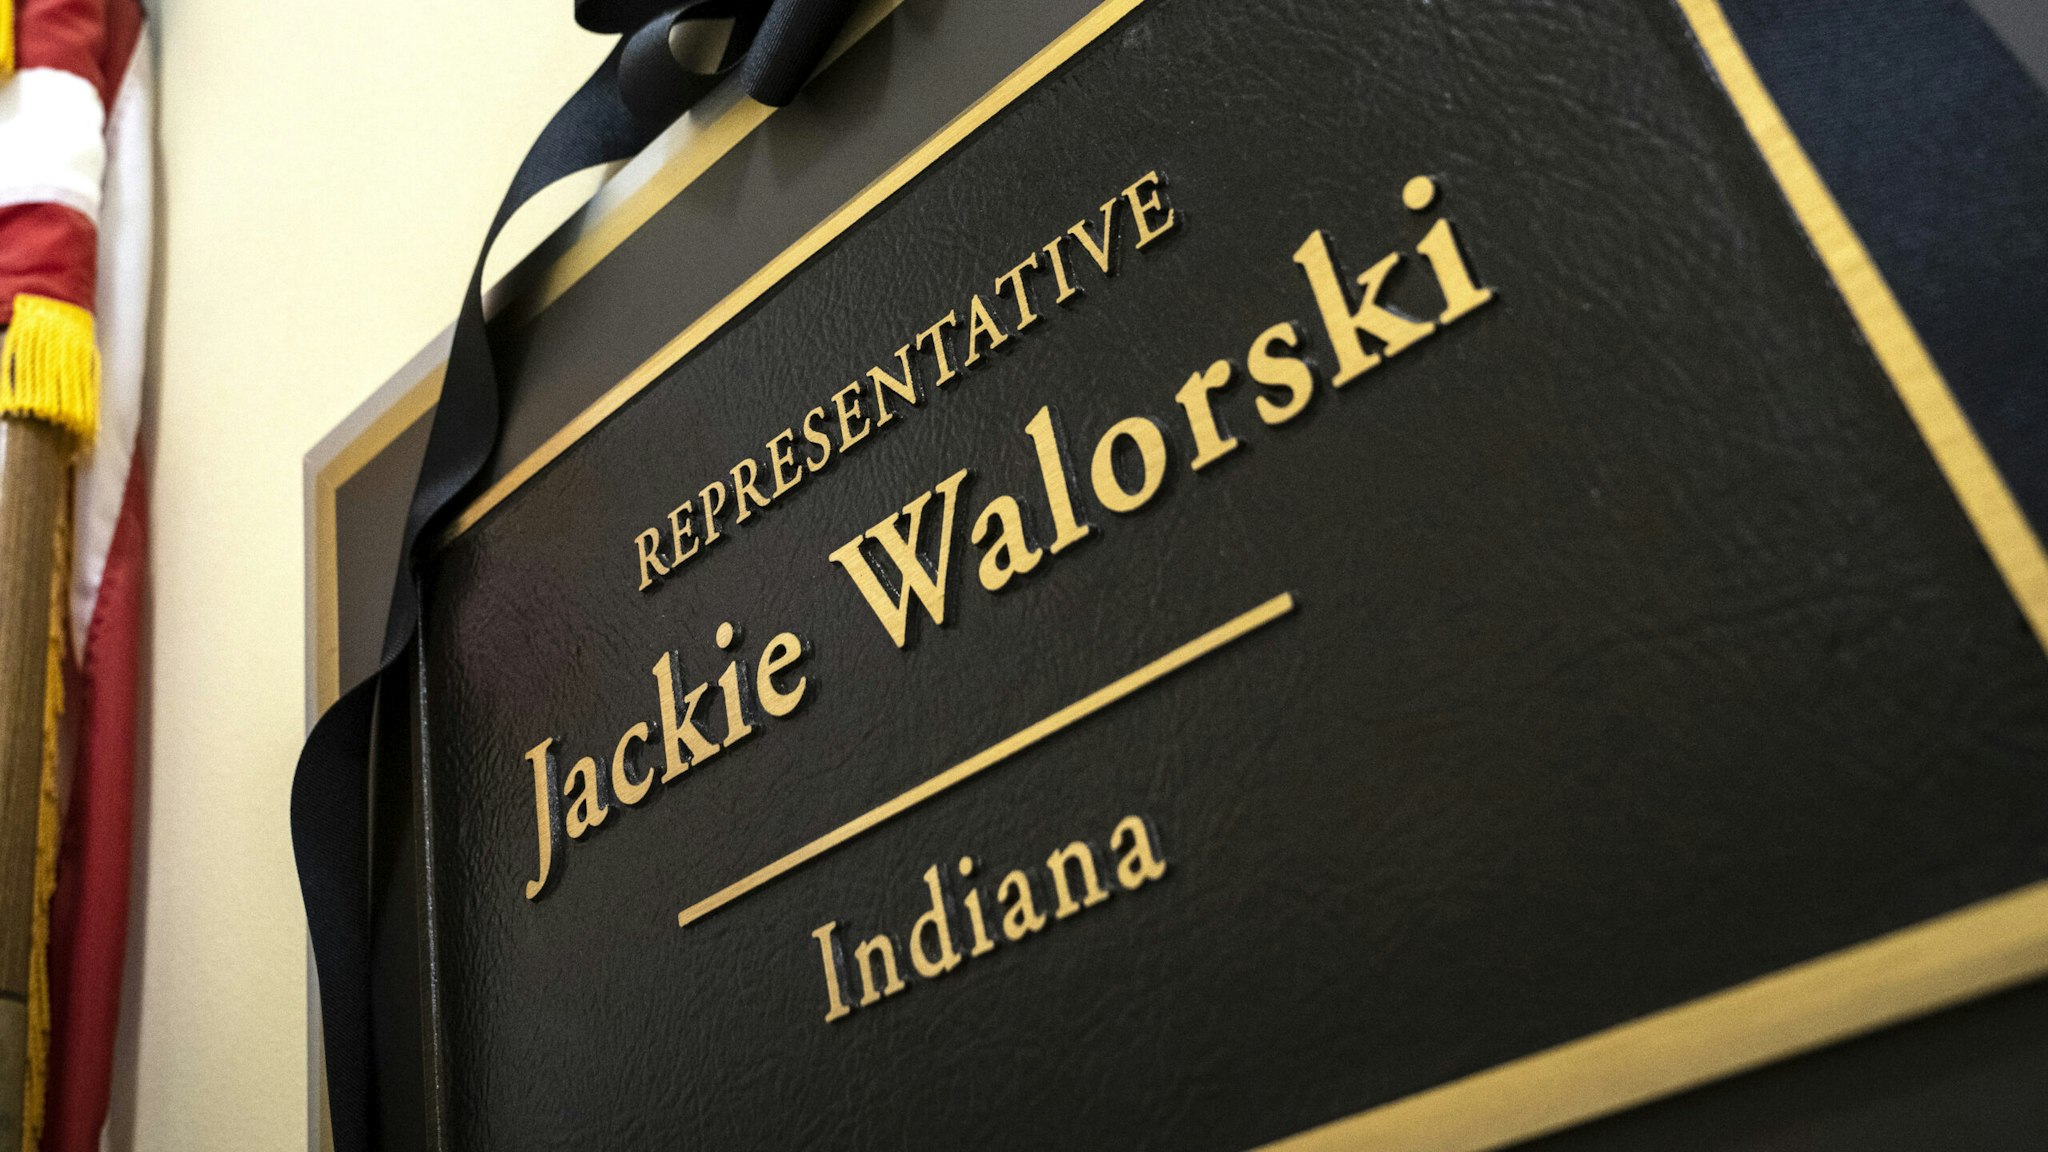 WASHINGTON, DC - AUGUST 4: A black ribbon adorns the nameplate of the late Rep. Jackie Walorski (R-IN) at her office in the Cannon House Office Building on August 4, 2022 in Washington, DC. Walorski, 58, and two staff members were killed in a car crash in Elkhart County, Indiana on Wednesday.